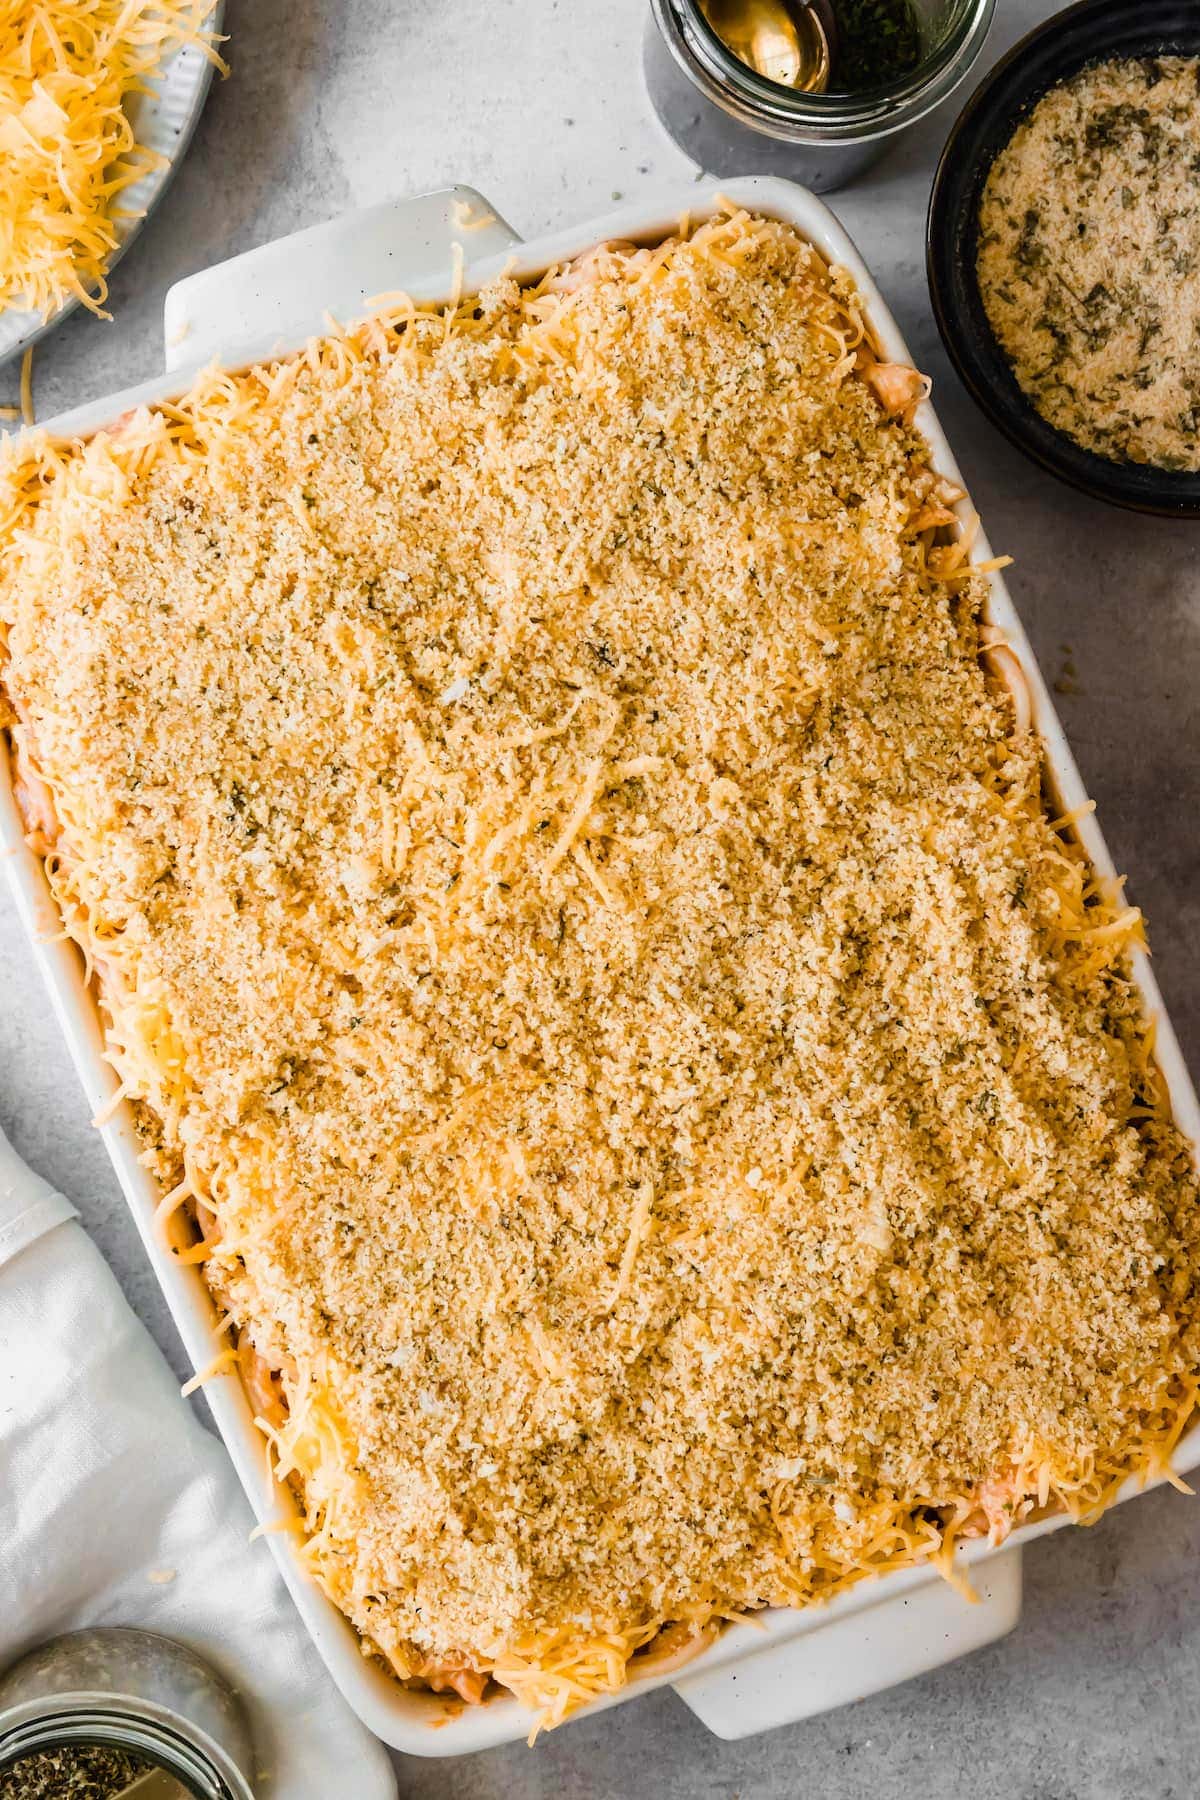 Unbaked Spaghetti Casserole with chicken in a 9x13 baking pan